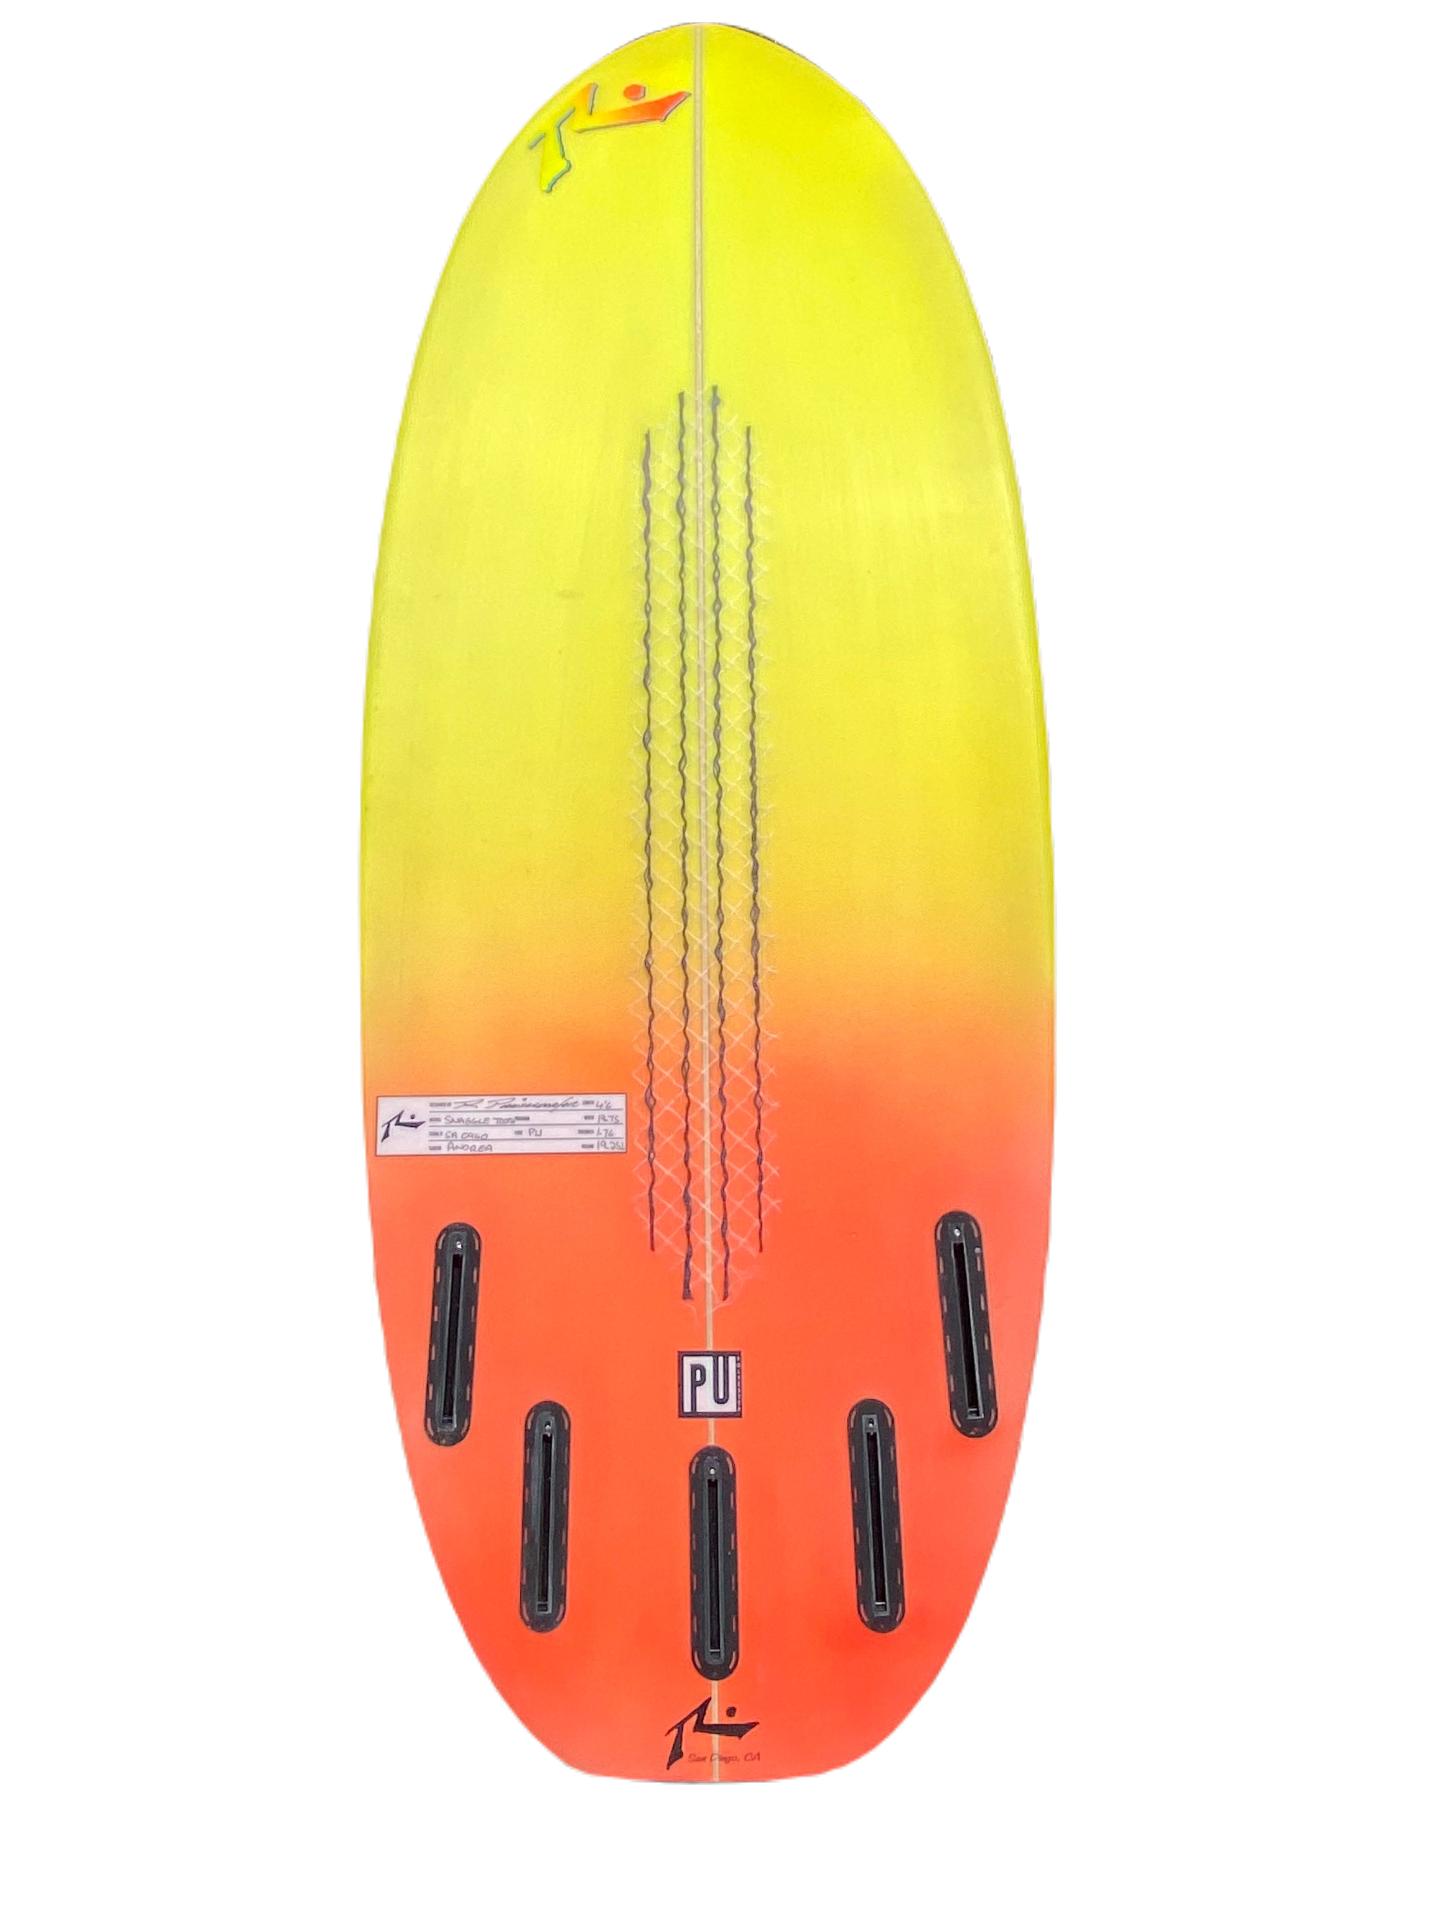 Snaggle tooth - 4'6